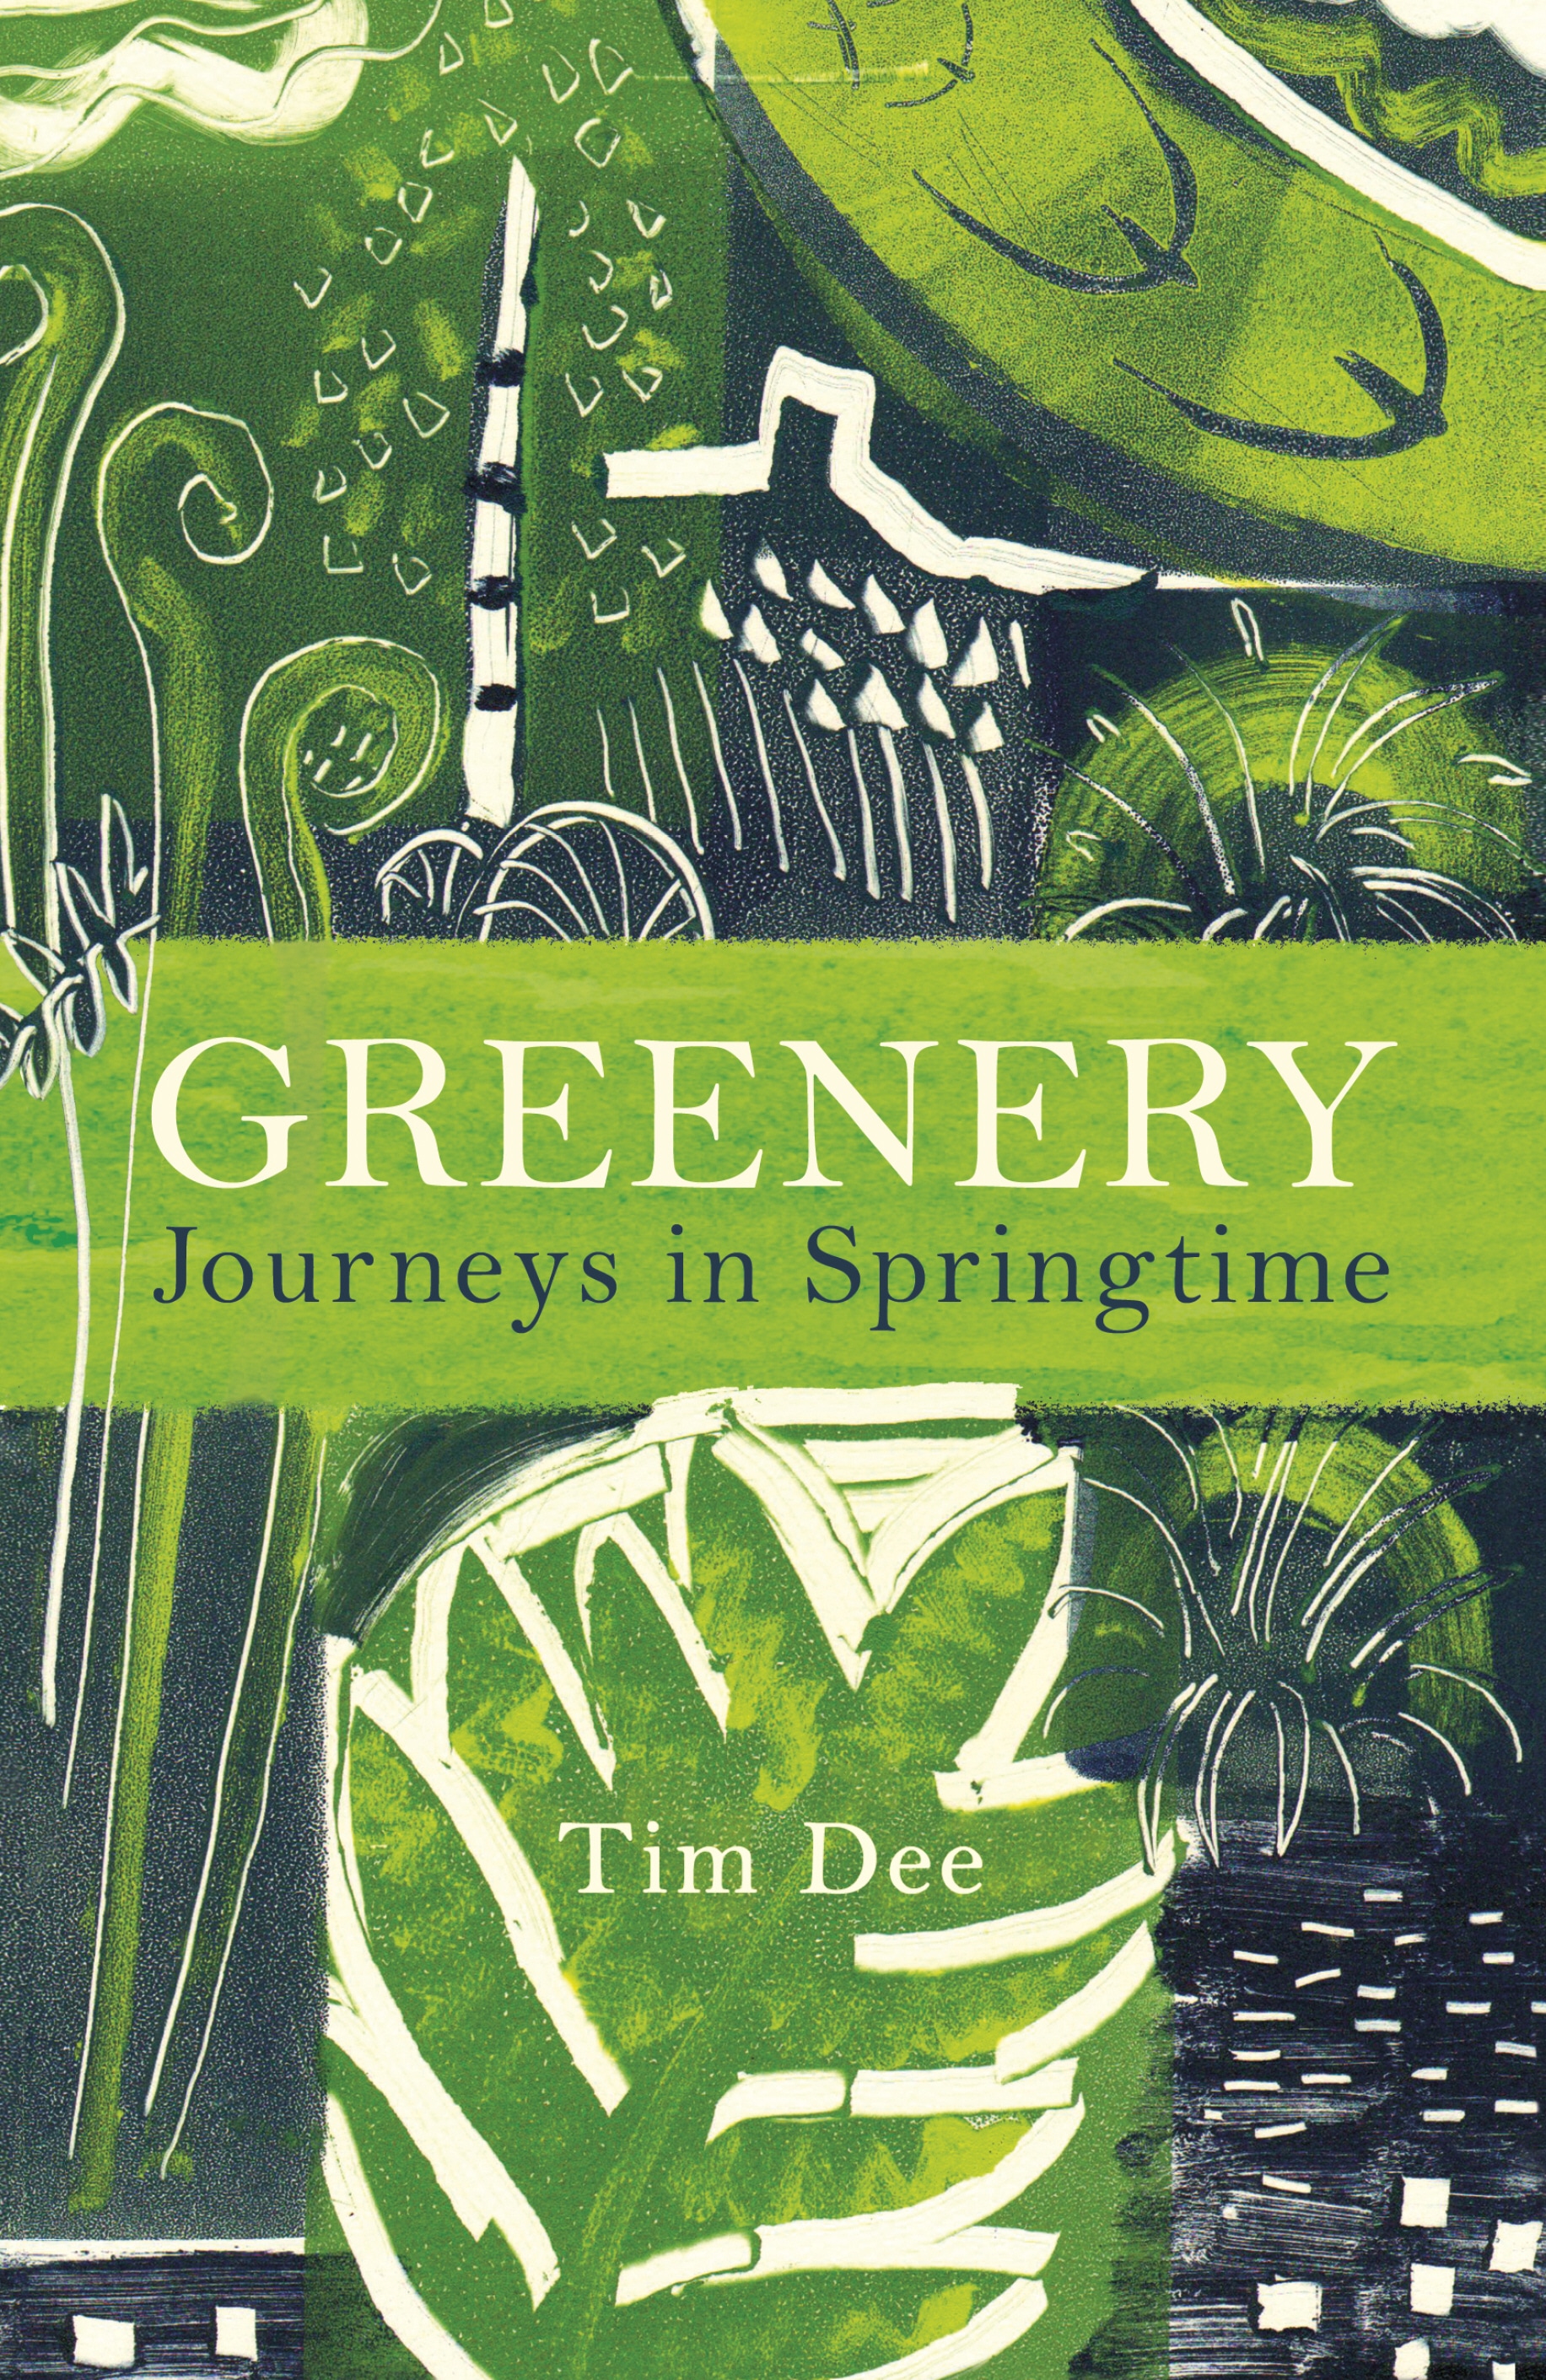 Book “Greenery” by Tim Dee — March 26, 2020